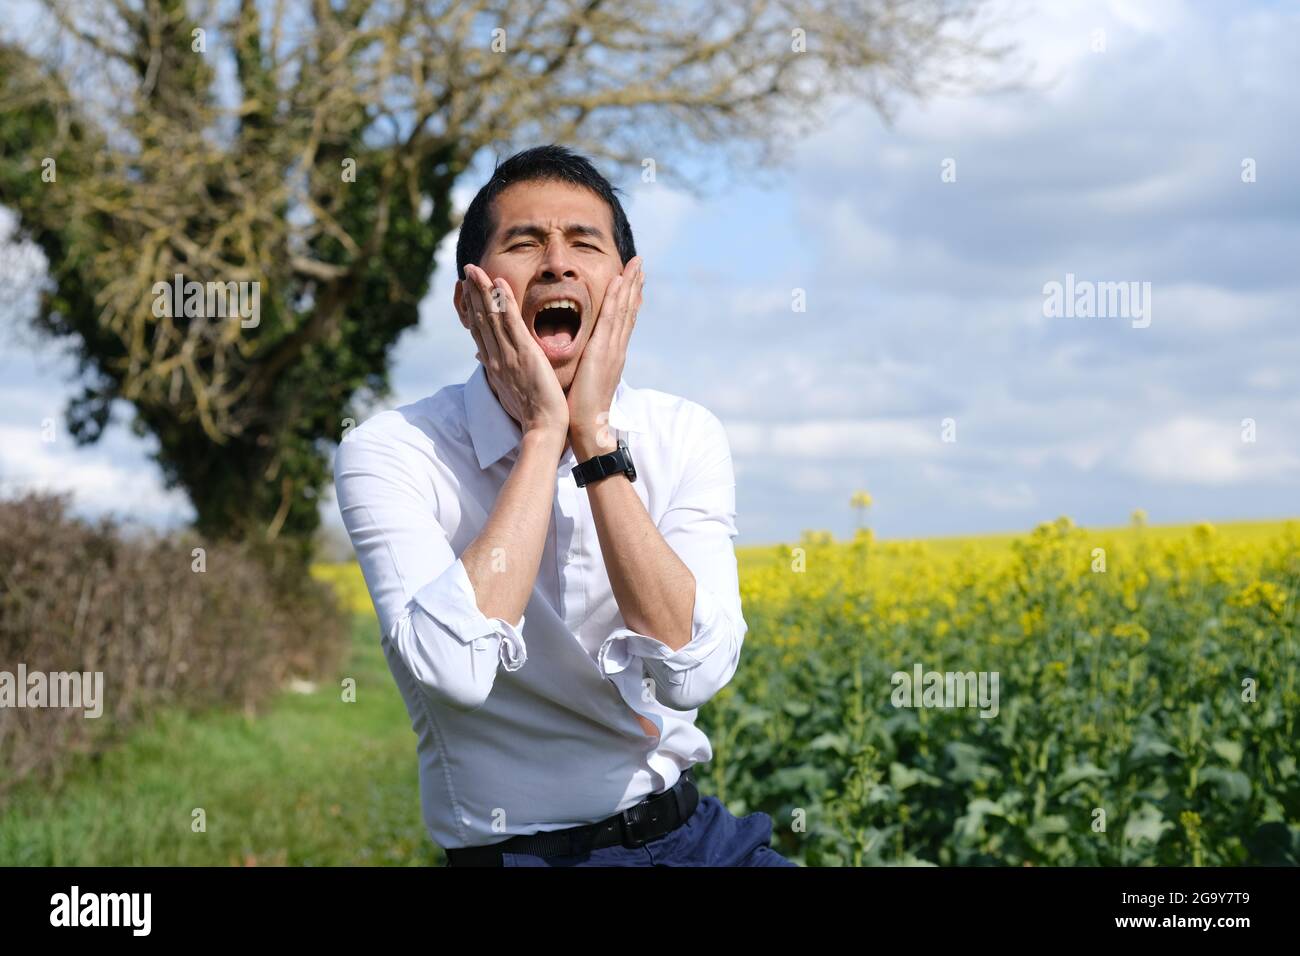 Man standing in a field with his hands on his face screaming, France Stock Photo